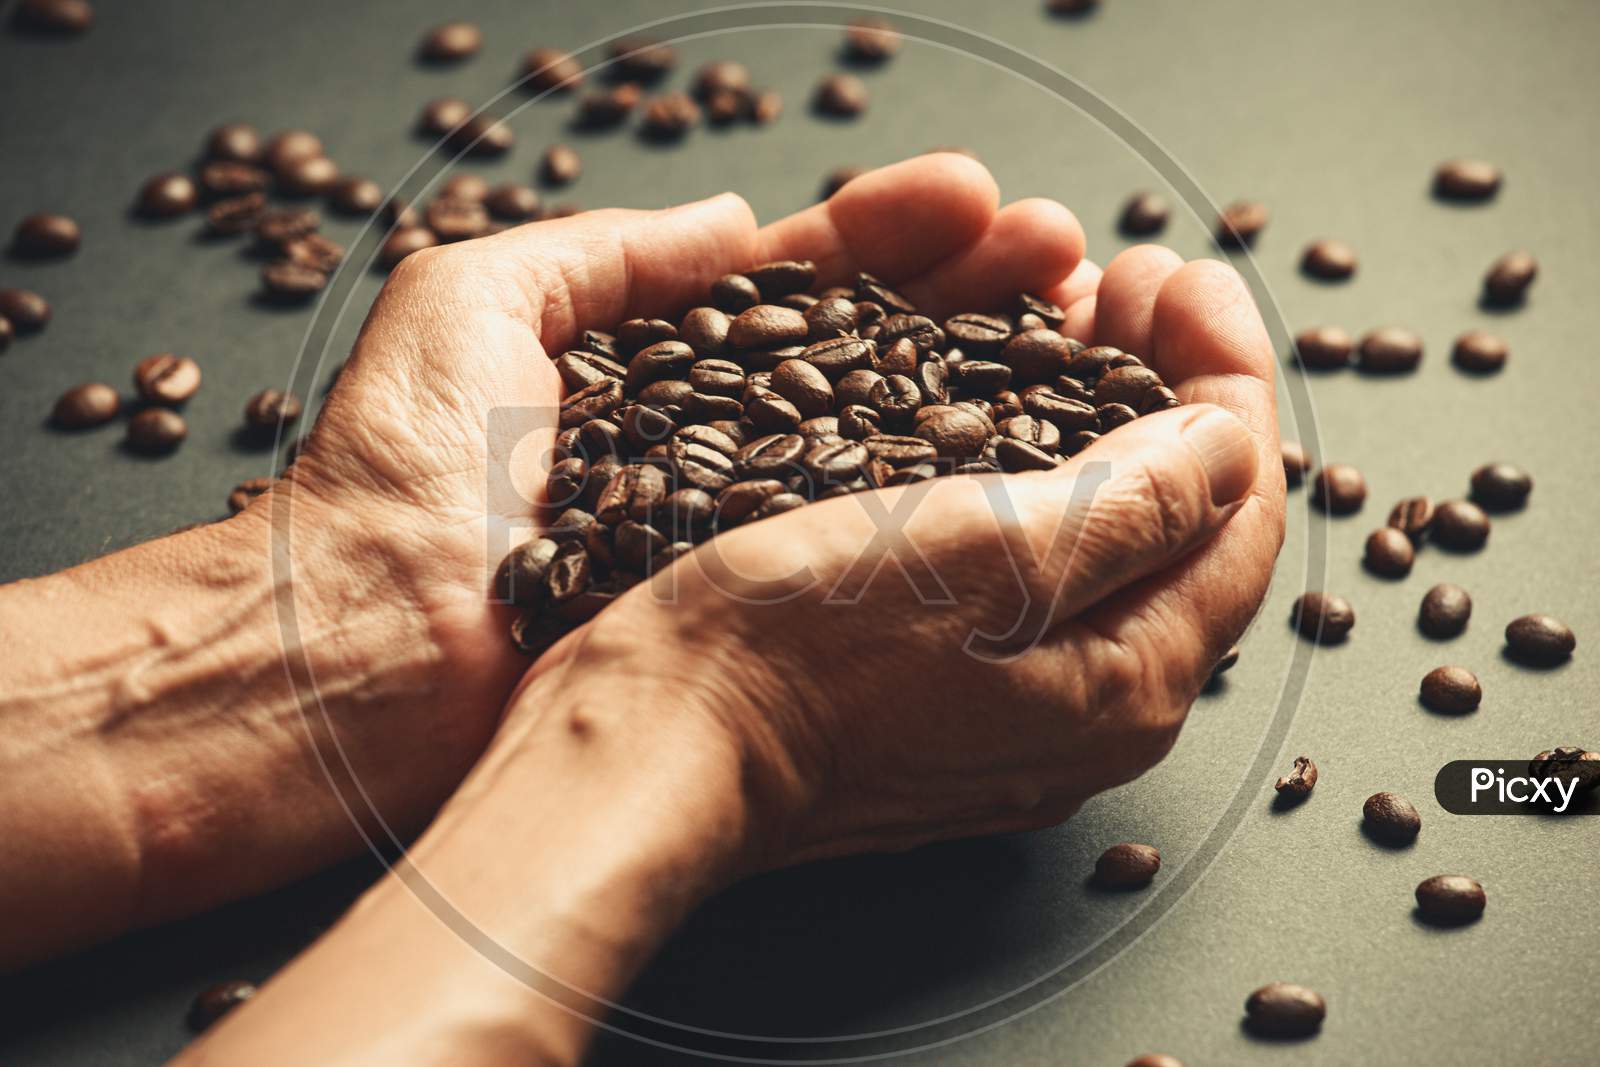 Old Hands Holding A Lot Of Coffee Grains Over A Dark Background